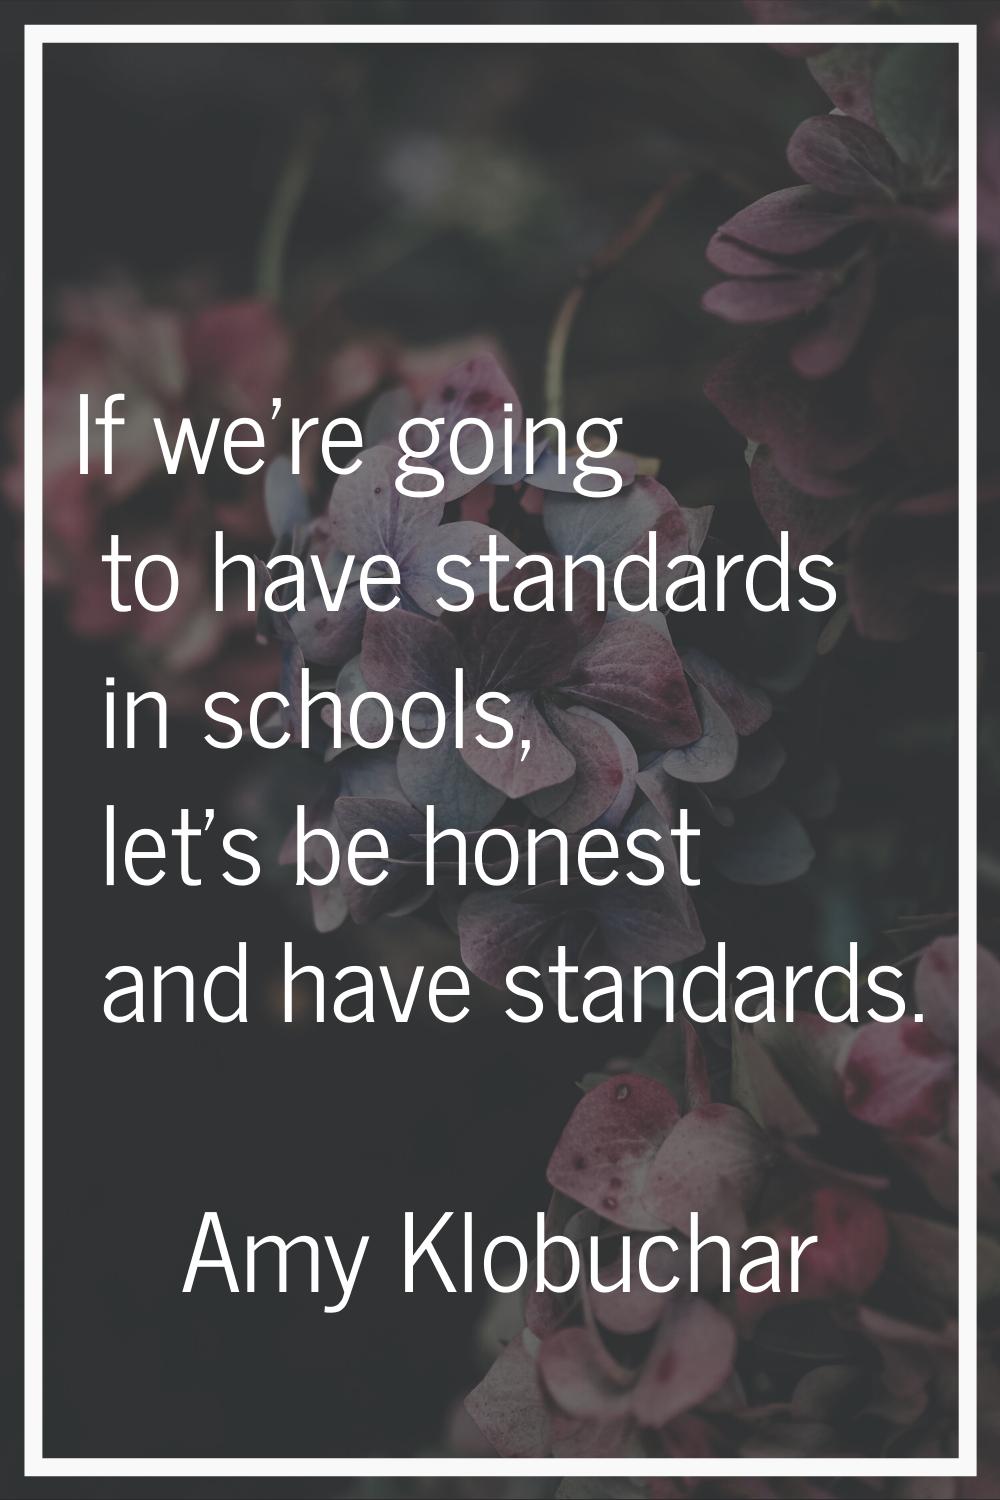 If we're going to have standards in schools, let's be honest and have standards.